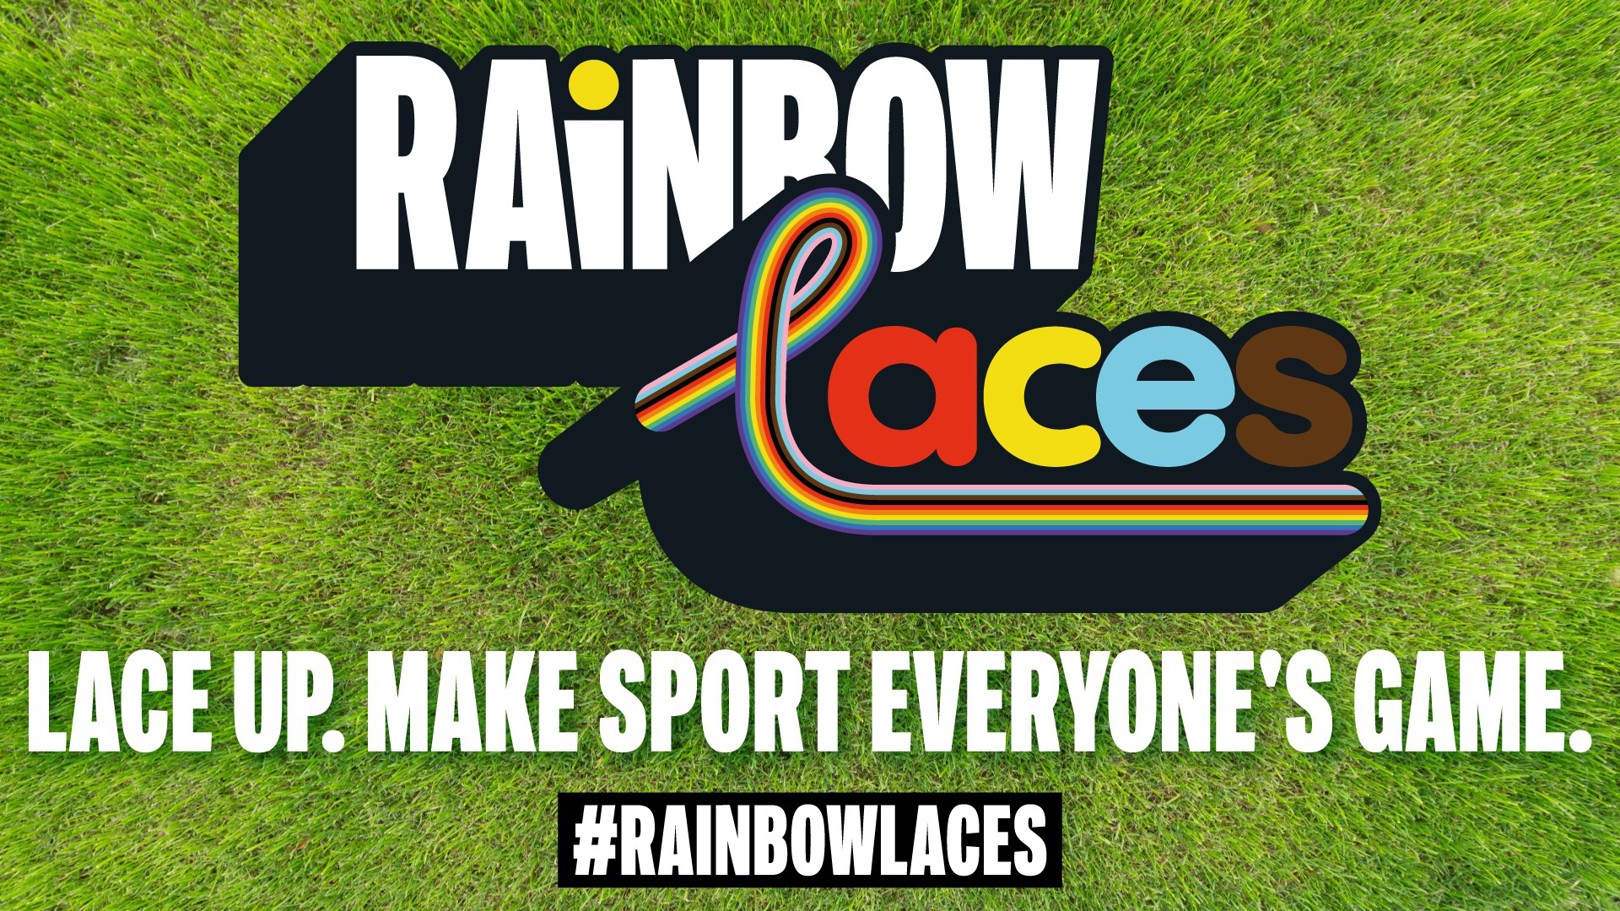 Premier League and Stonewall launch LGBT football initiative, Football  News